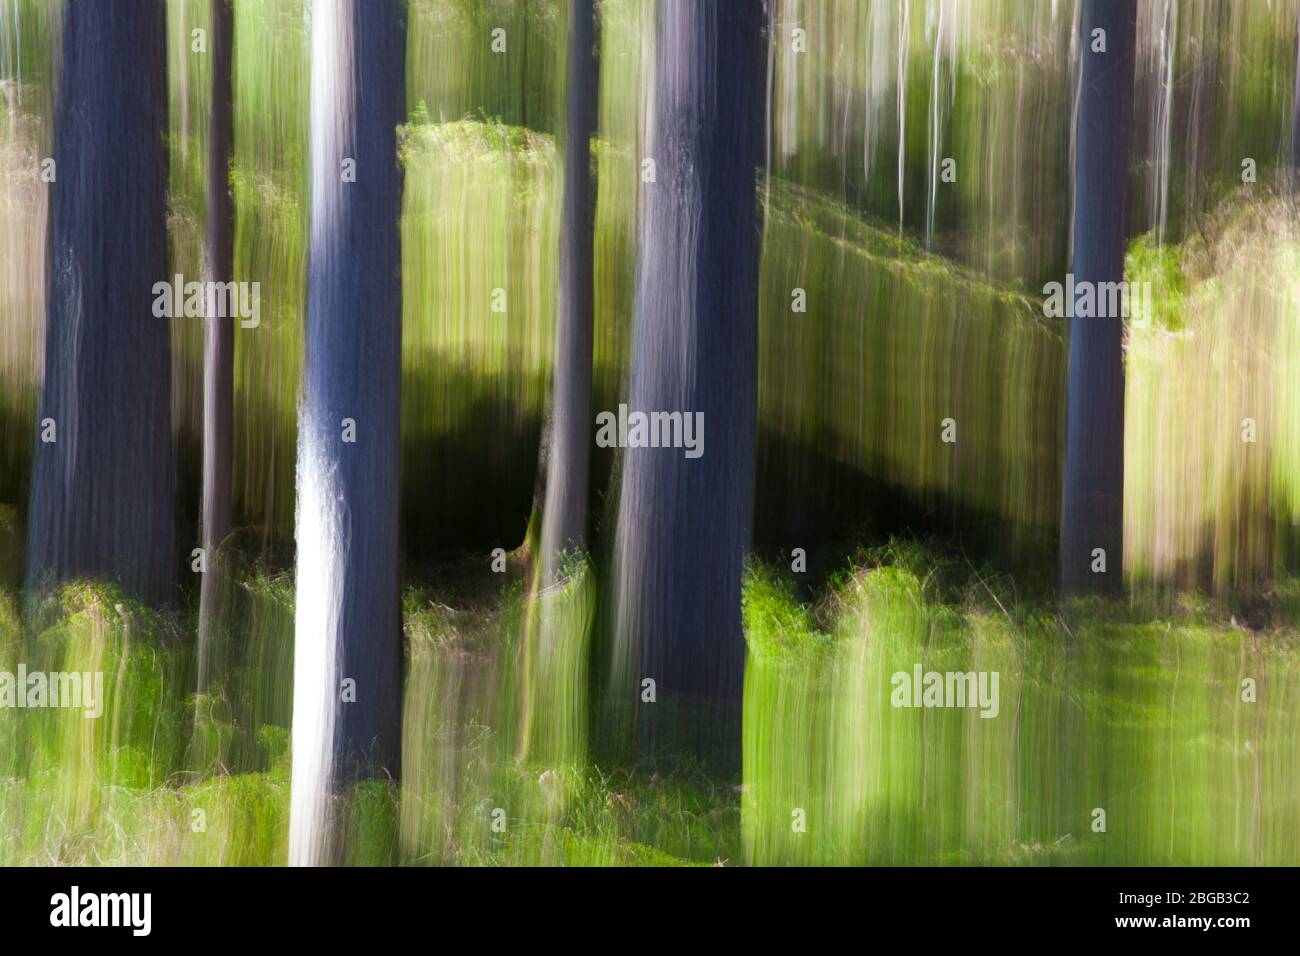 Abstracted spruce forest near the lake Vansjø in Østfold, Norway. Stock Photo